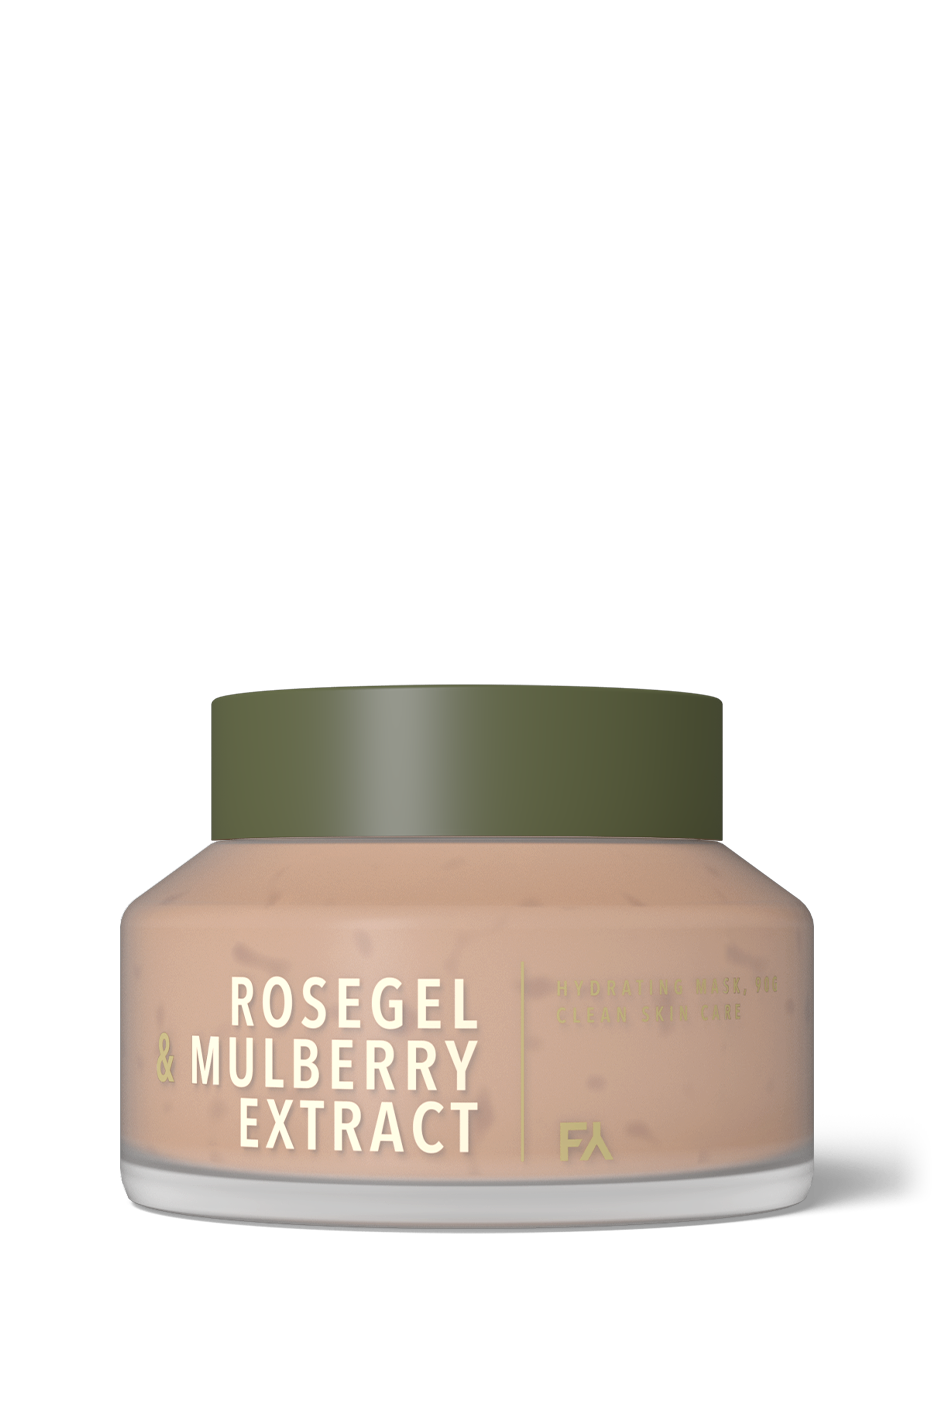 Product picture of the Rosegle & Mulberry Extract hydrating face mask by Fields of Yarrow on a transparent background